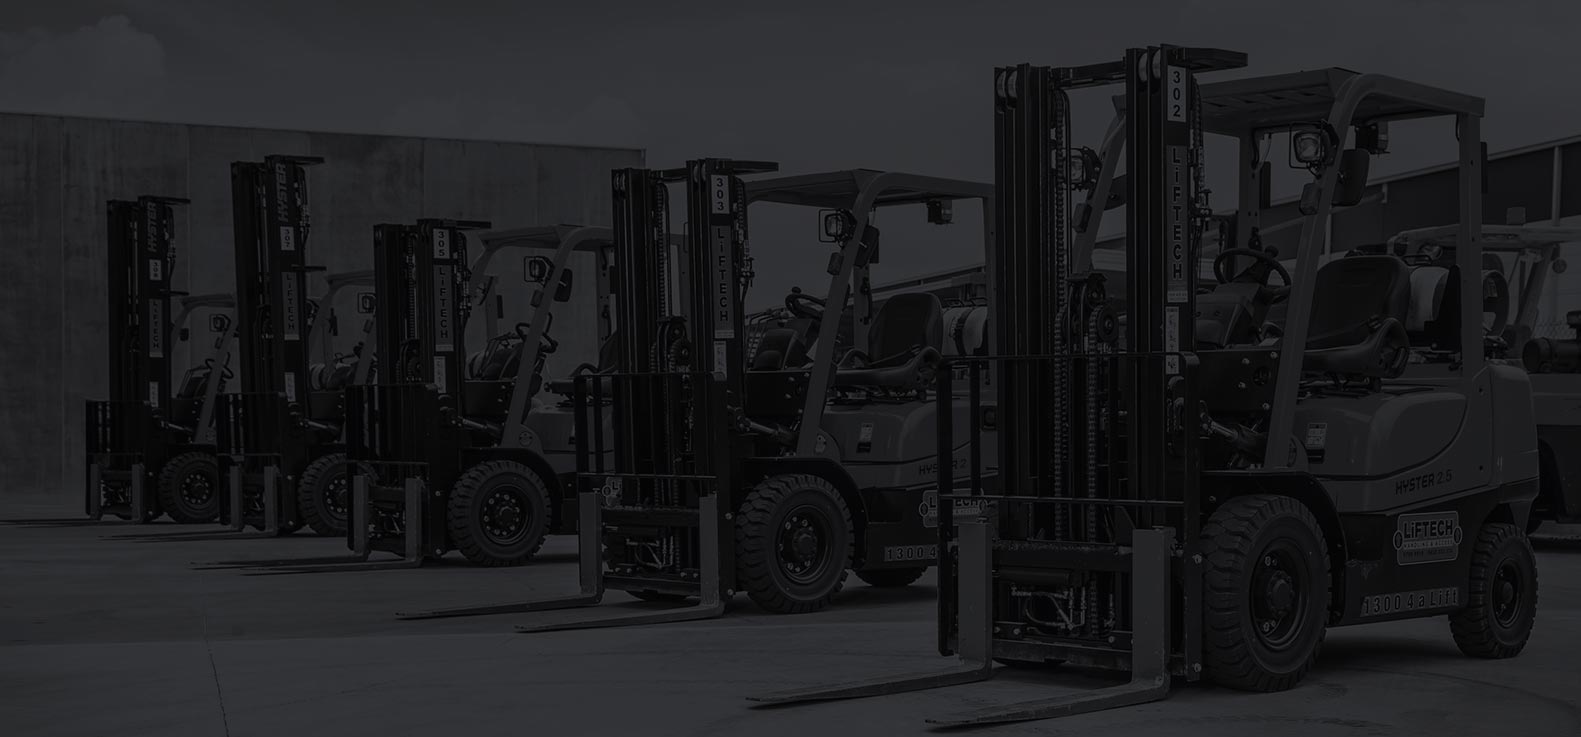 Forklift - Access Equipment Hire